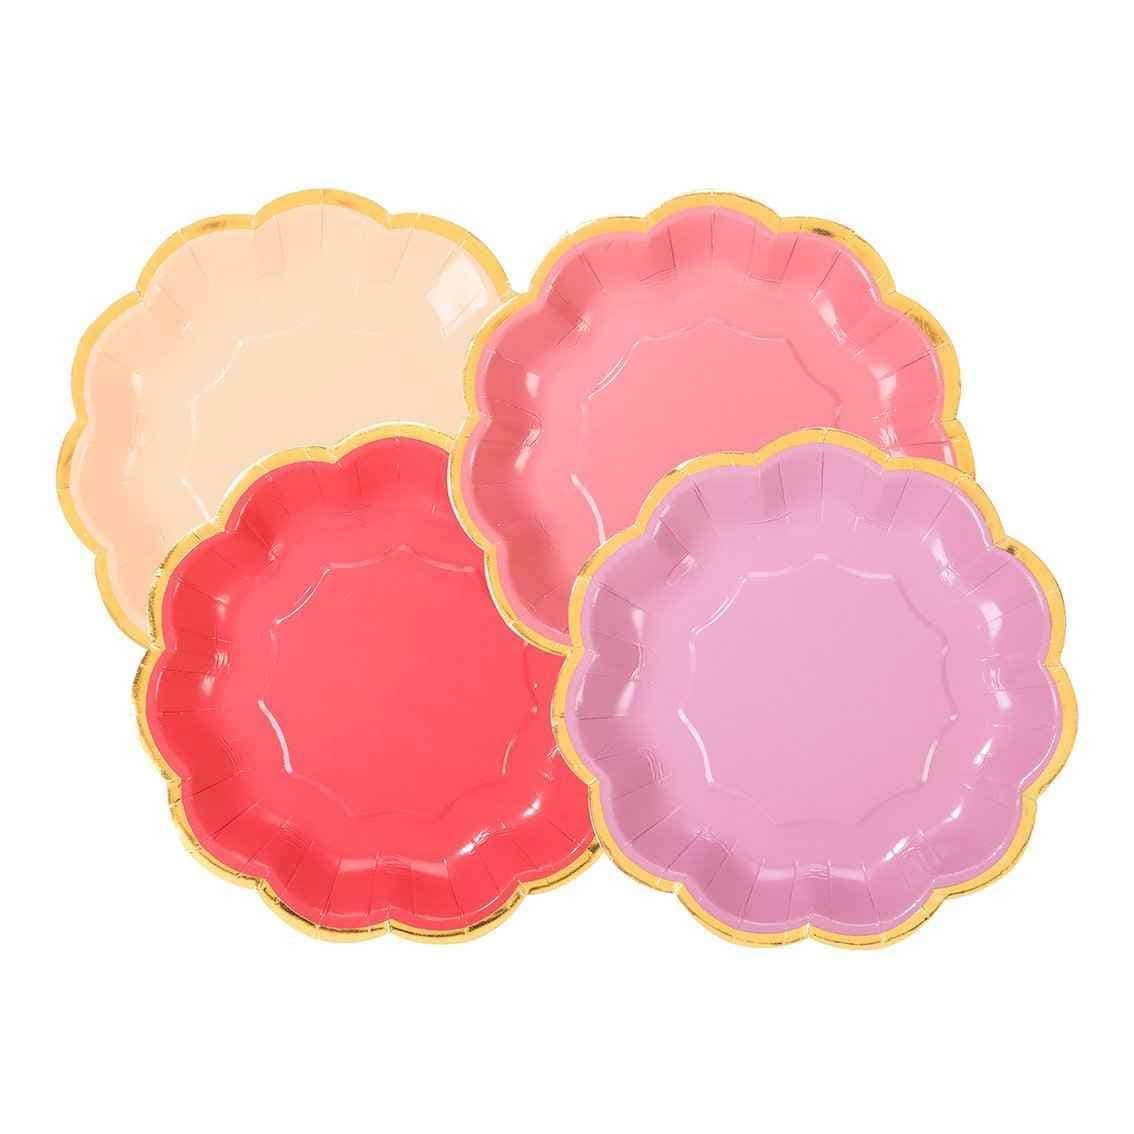 Pink and Gold Floral Disposable Party Plates Set of 8 Pink Floral Paper  Plates Birthday Bridal Shower Tea Party Garden Party 